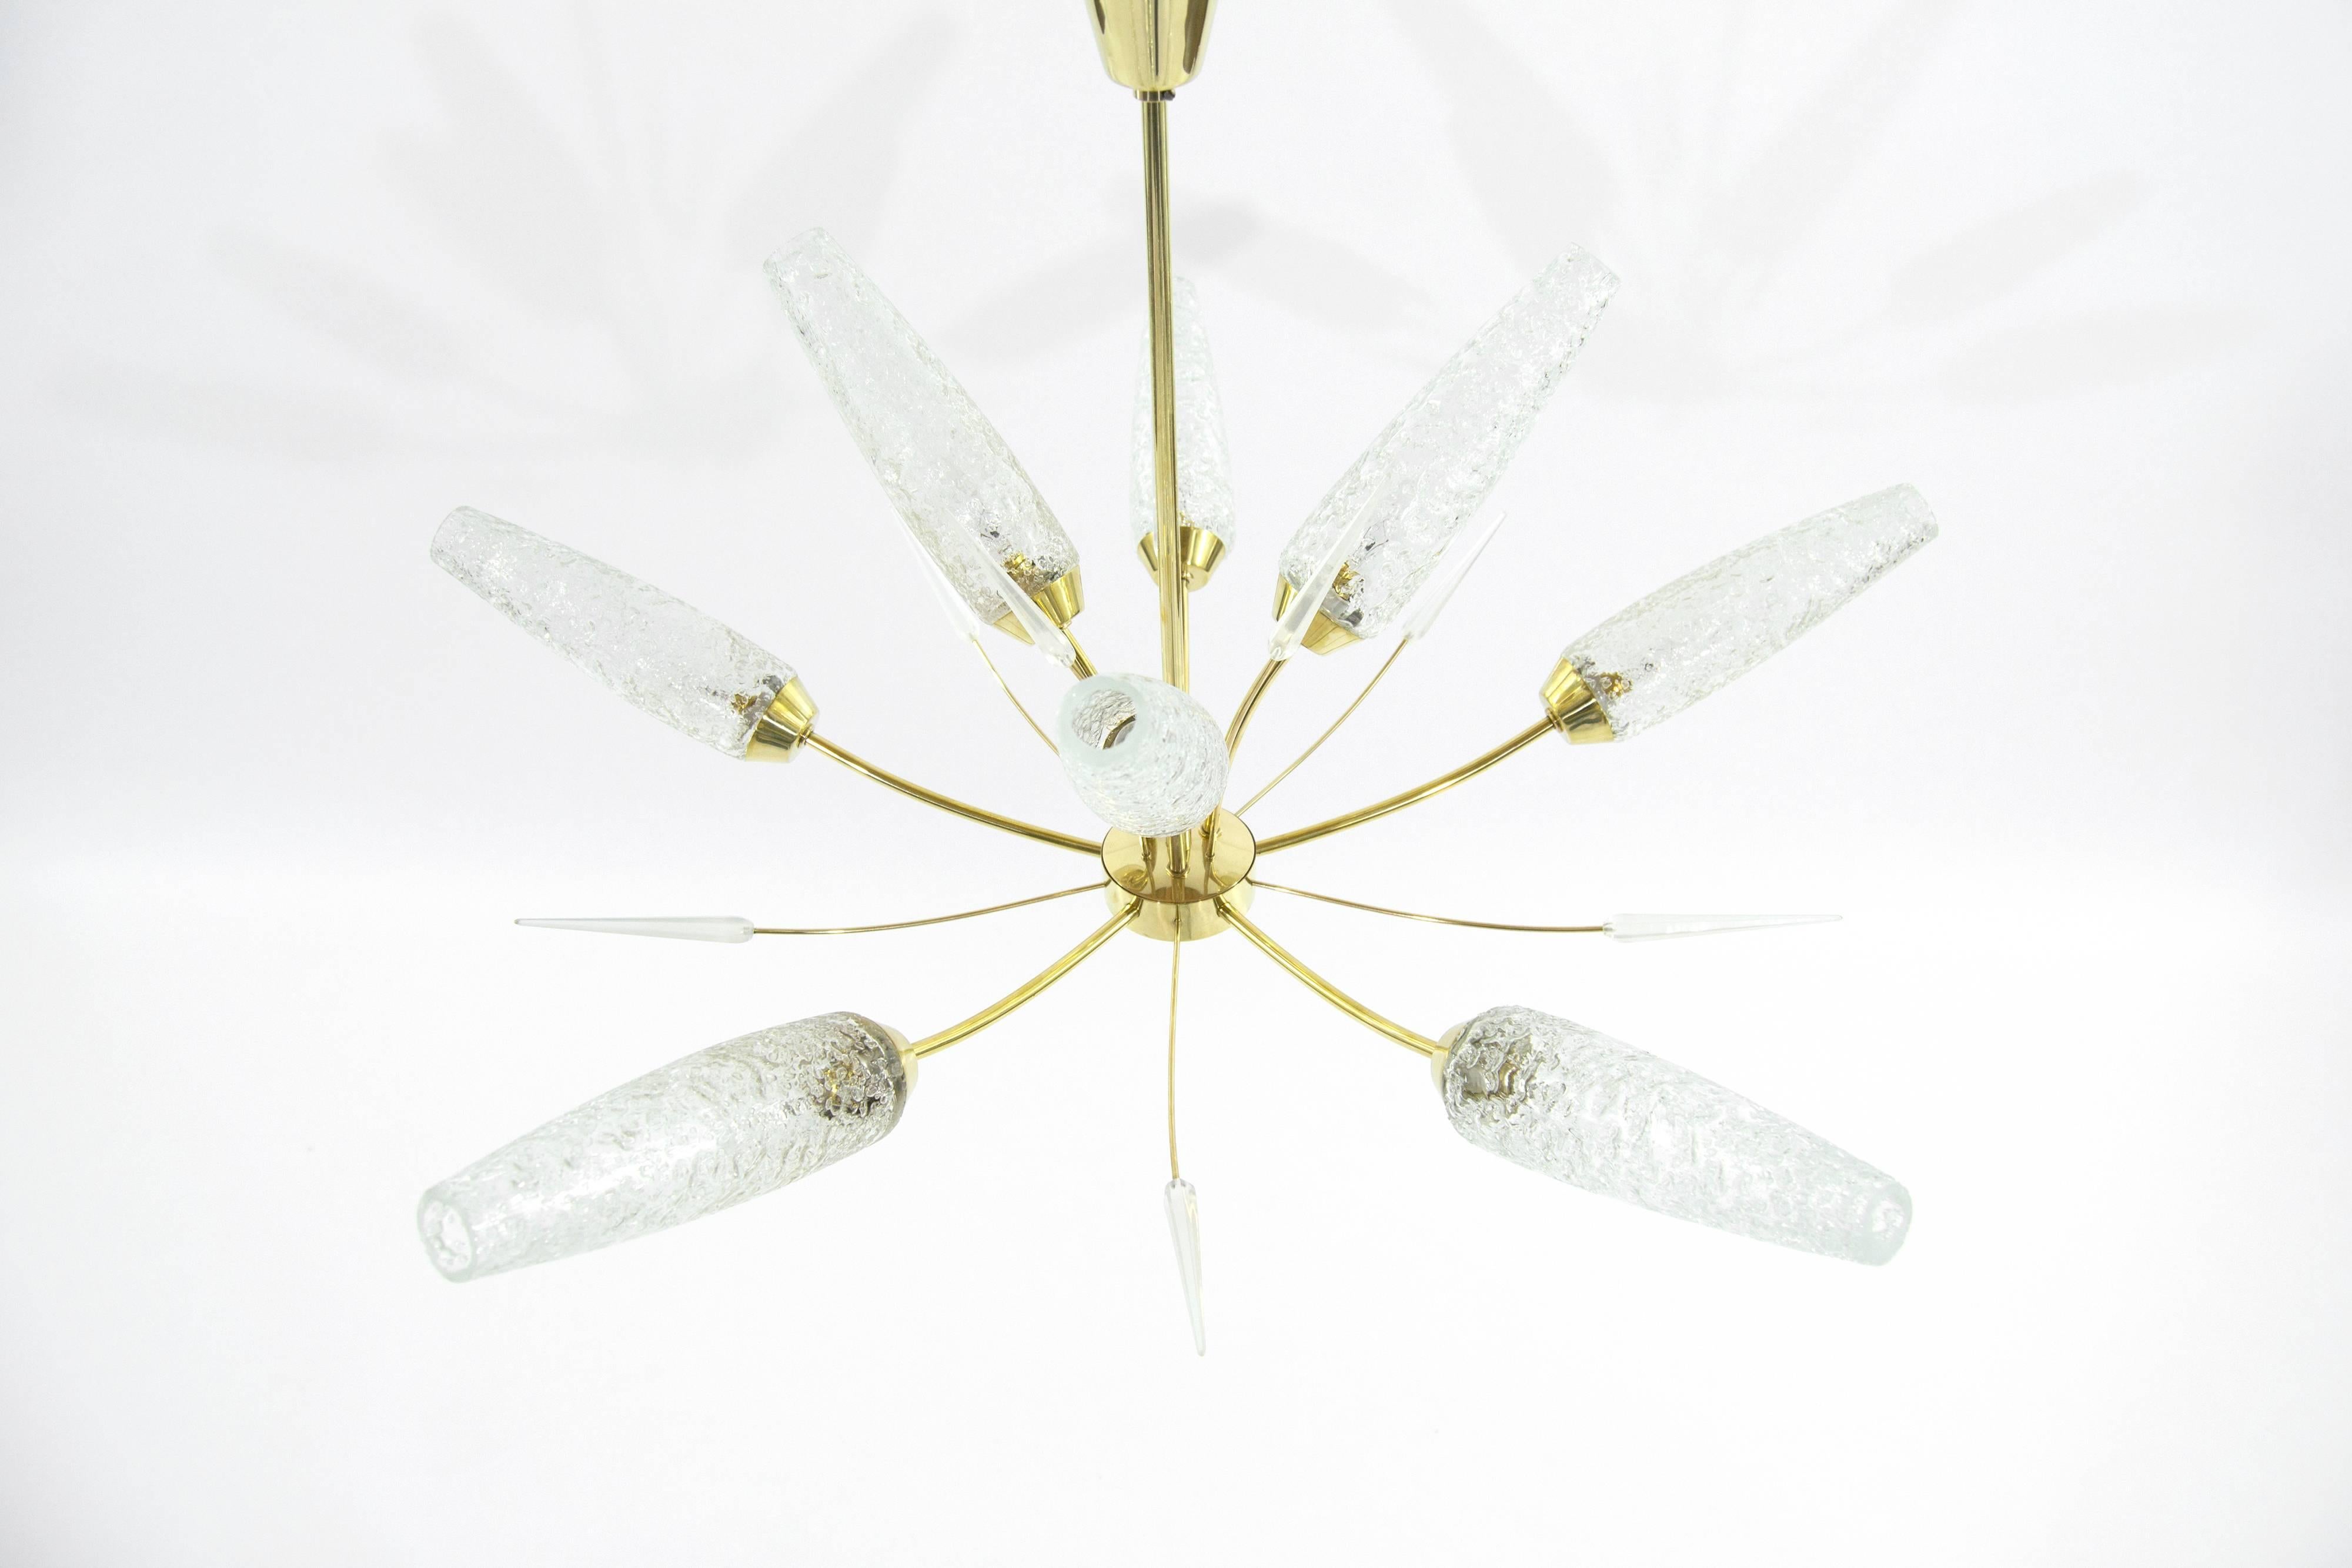 This exquisite sample of Italian lighting features seven arms ending in large Murano glass shades. Manufactured in Italy, circa 1950s. Newly polished and rewired.

Current drop is 21", however, adjustable.